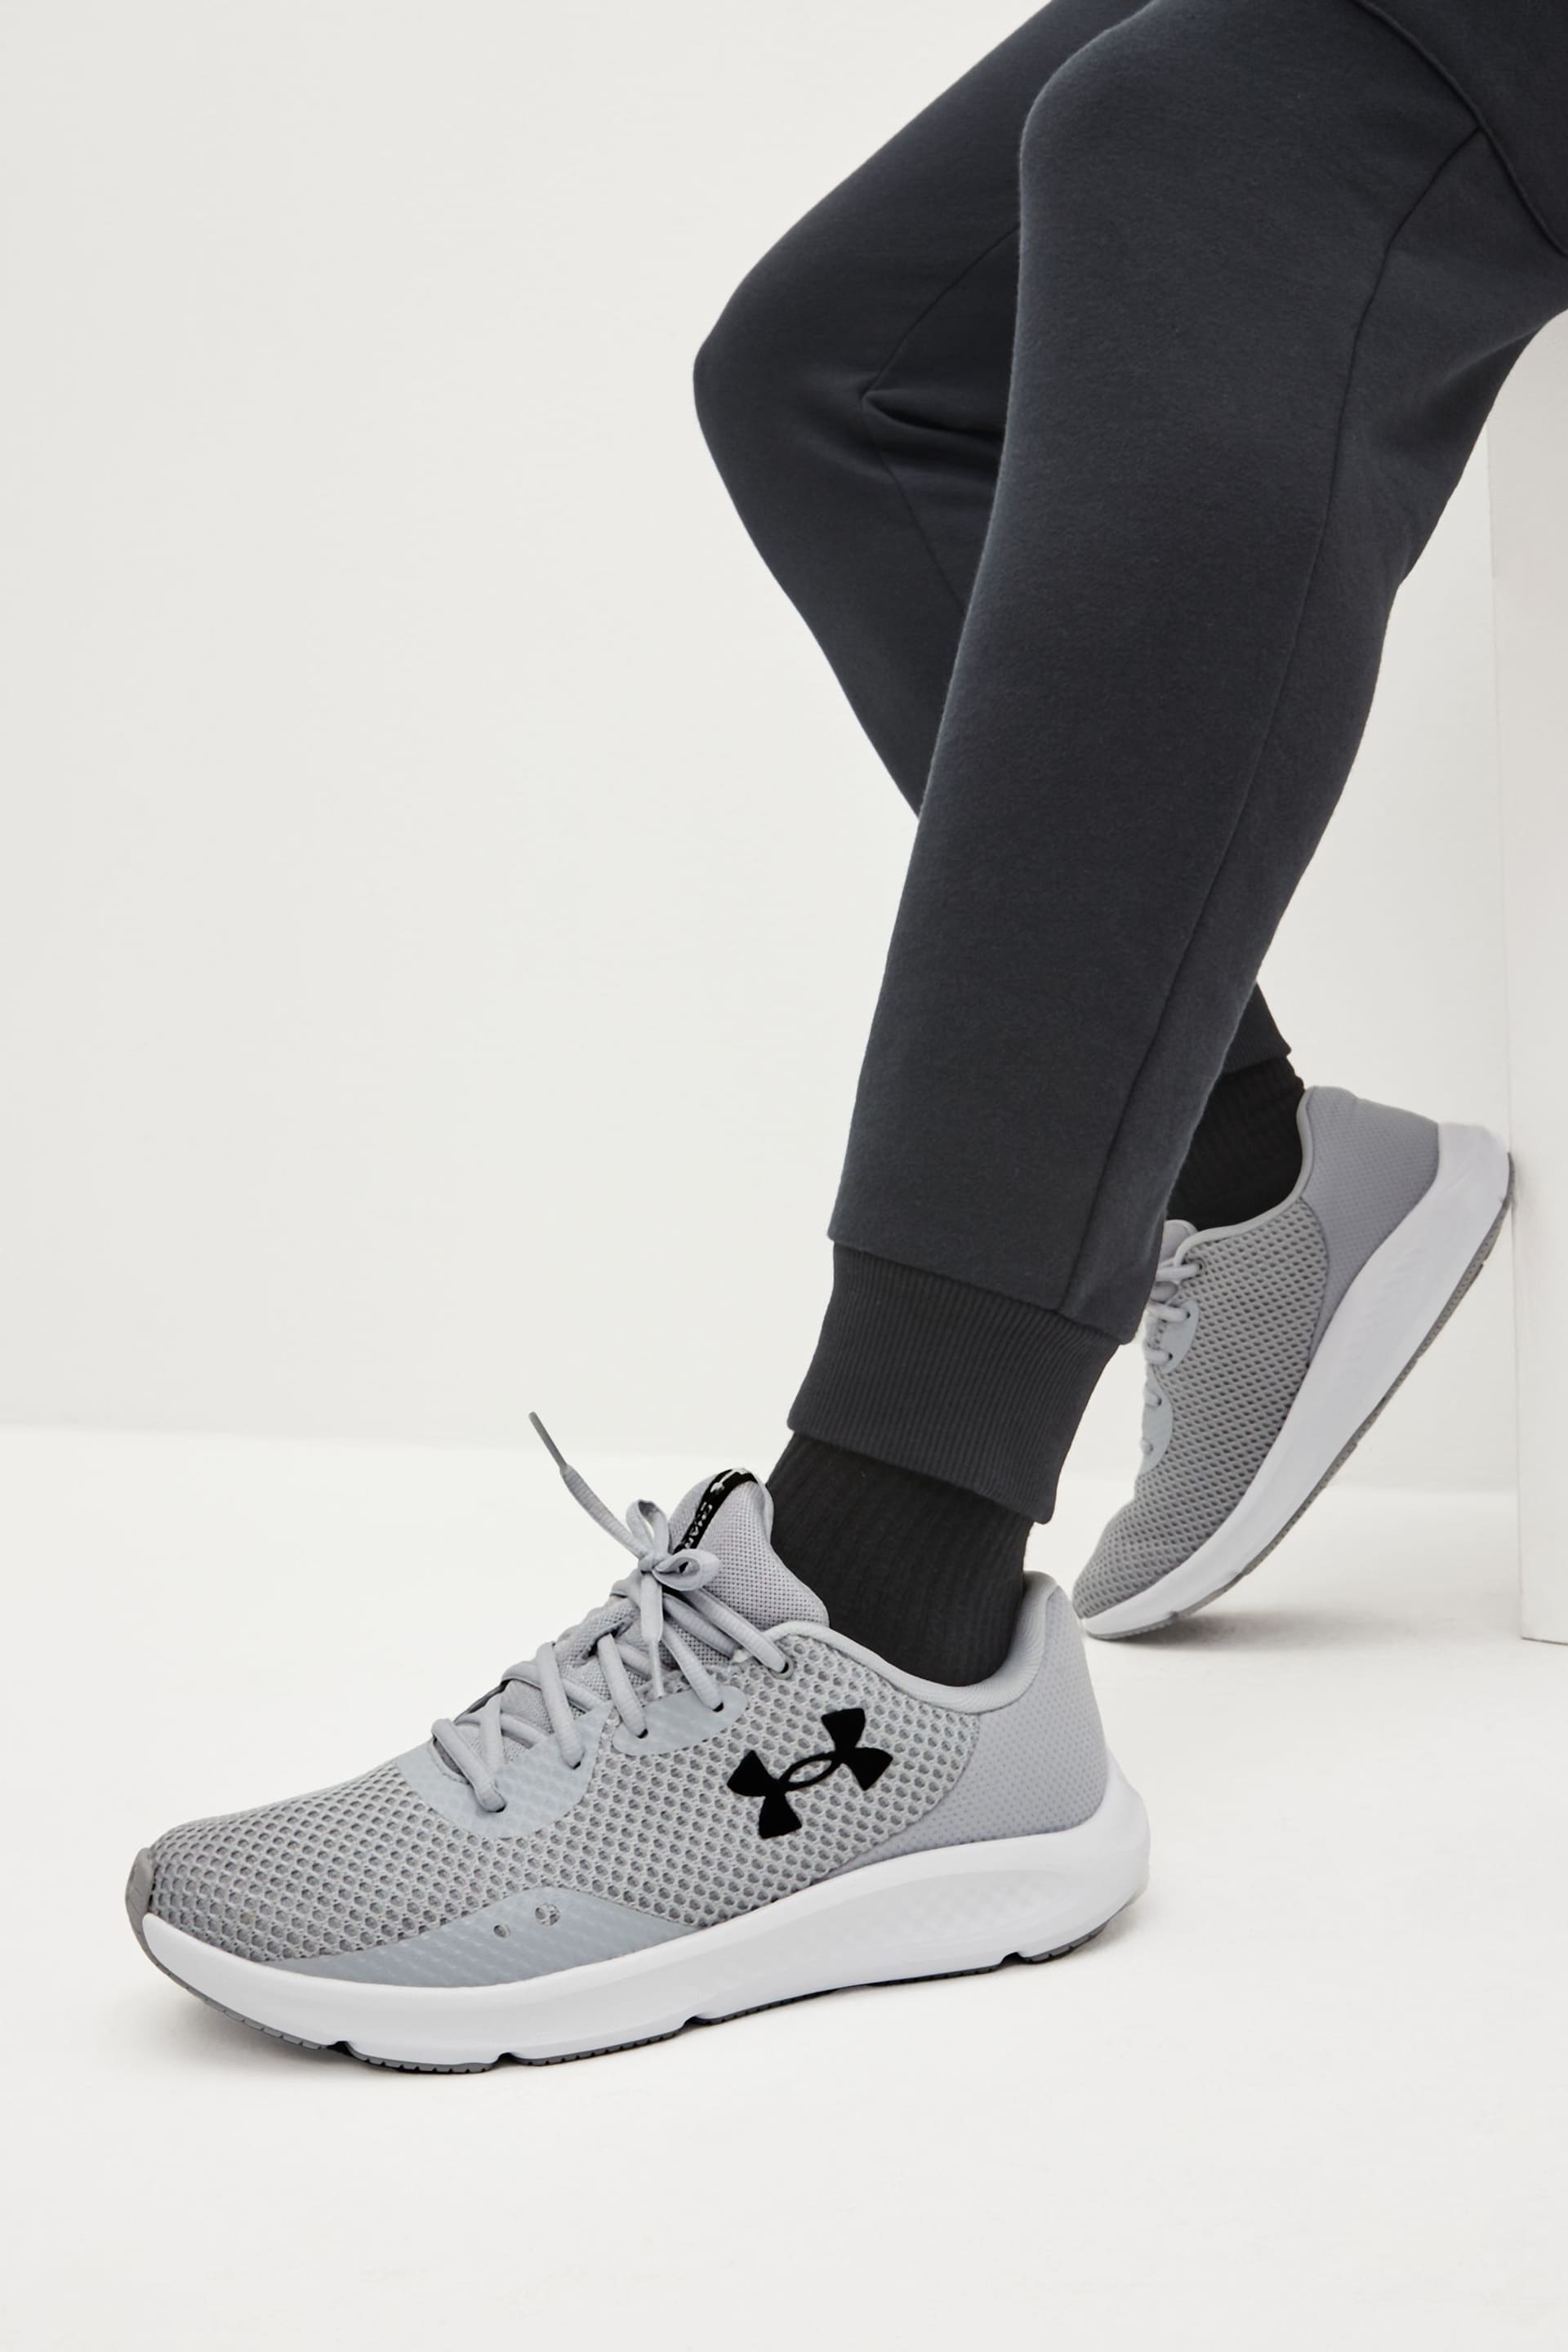 Under Armour Grey Charged Pursuit 3 Trainers - Image 2 of 2